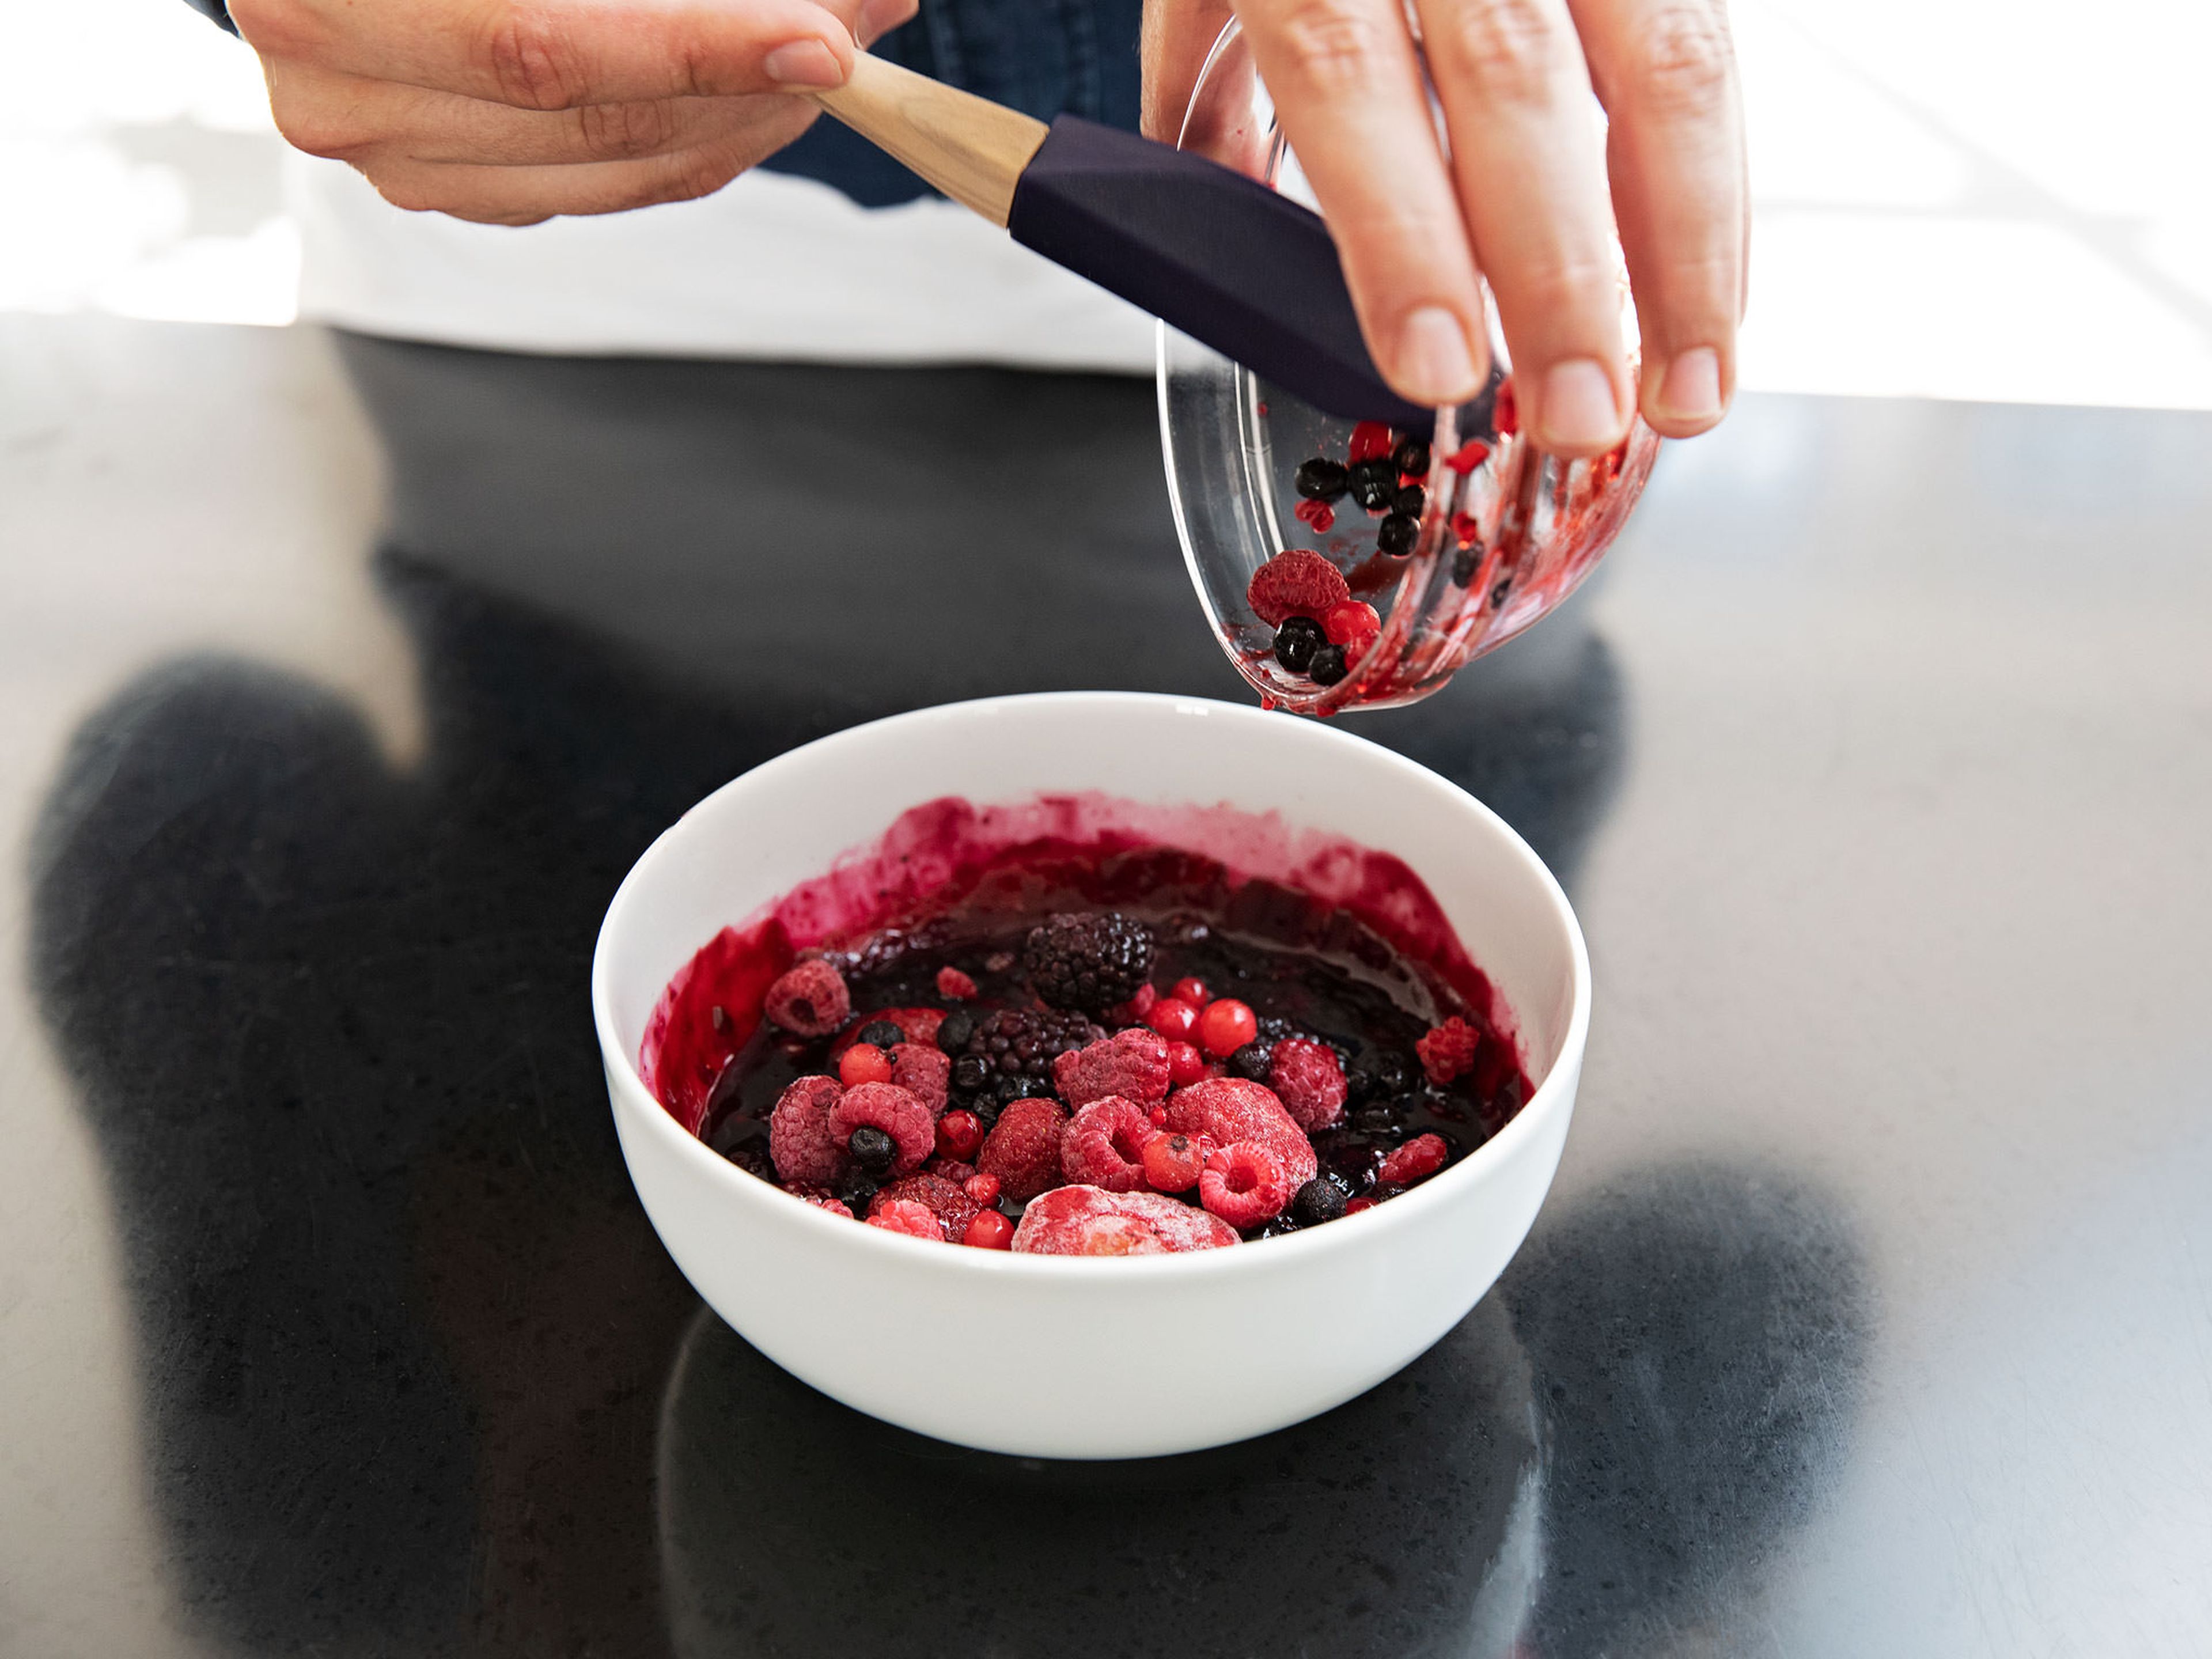 Remove both bowls, add the remaining frozen mixed berries to the berry compote, and stir until combined. Mix the porridge with berry compote. Enjoy!